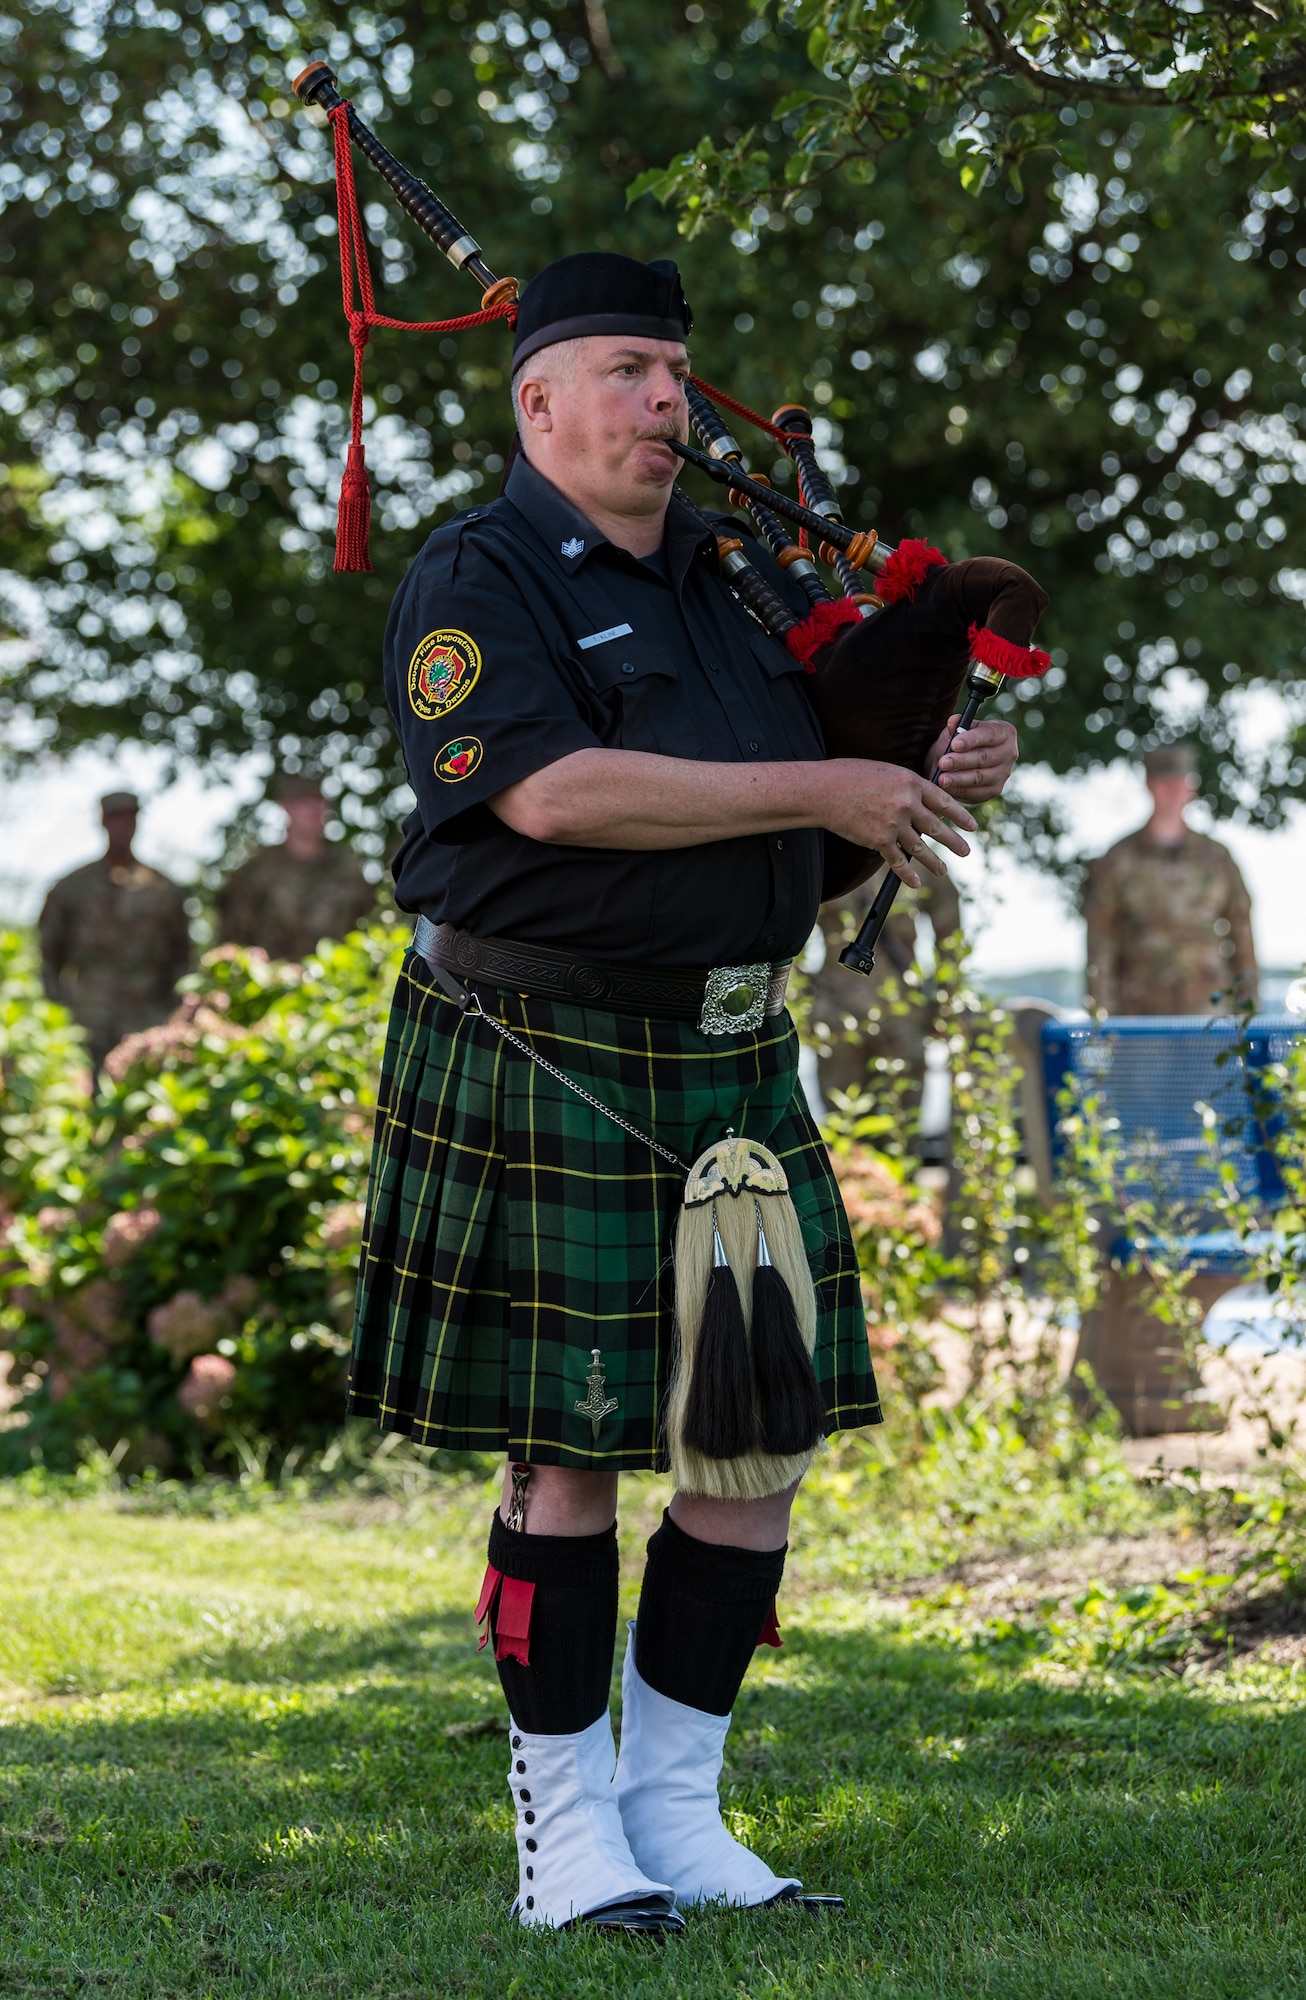 Timothy Kline, Dover Fire Pipes and Drums Corps, plays Amazing Grace at the conclusion of the 20th Anniversary 9/11 Remembrance Ceremony held at the Air Mobility Command Museum's 9/11 Memorial on Dover Air Force Base, Delaware, Sept. 11, 2021. The base hosted the ceremony to remember and honor those who perished in the attacks on Sept. 11, 2001. (U.S. Air Force photo by Roland Balik)